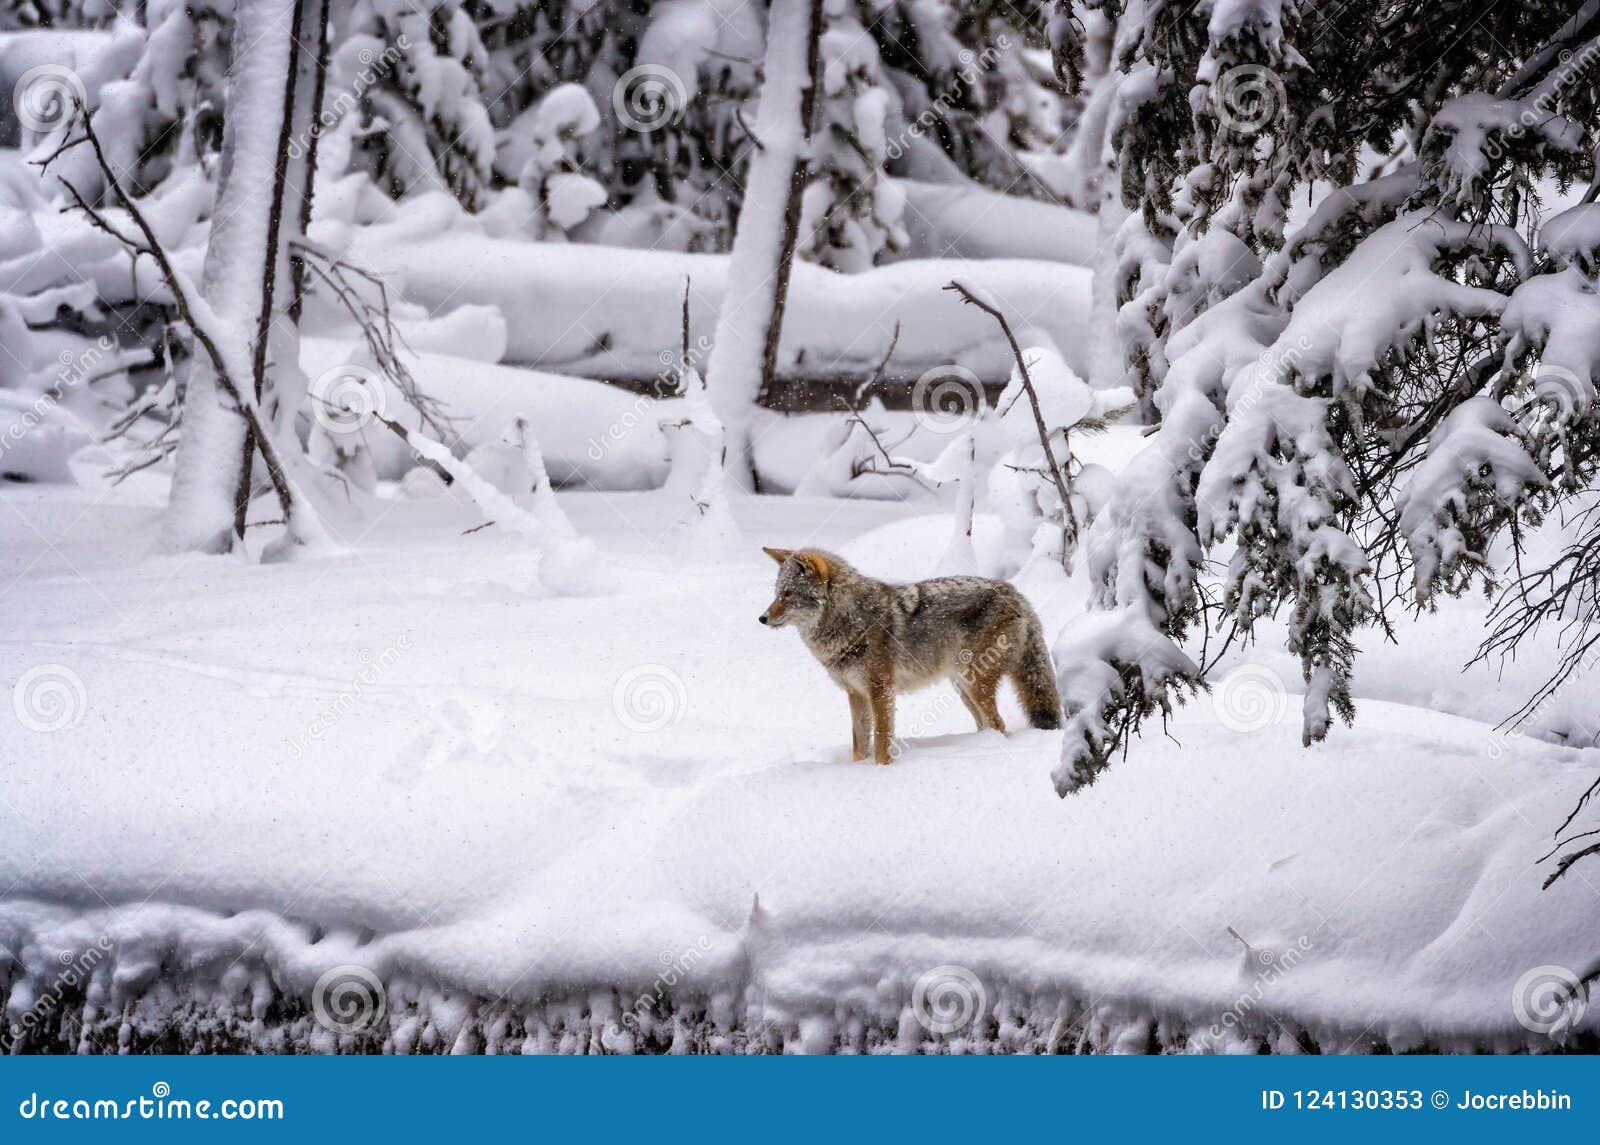 coyote stops and focuses on possible prey in yellowstone..psd